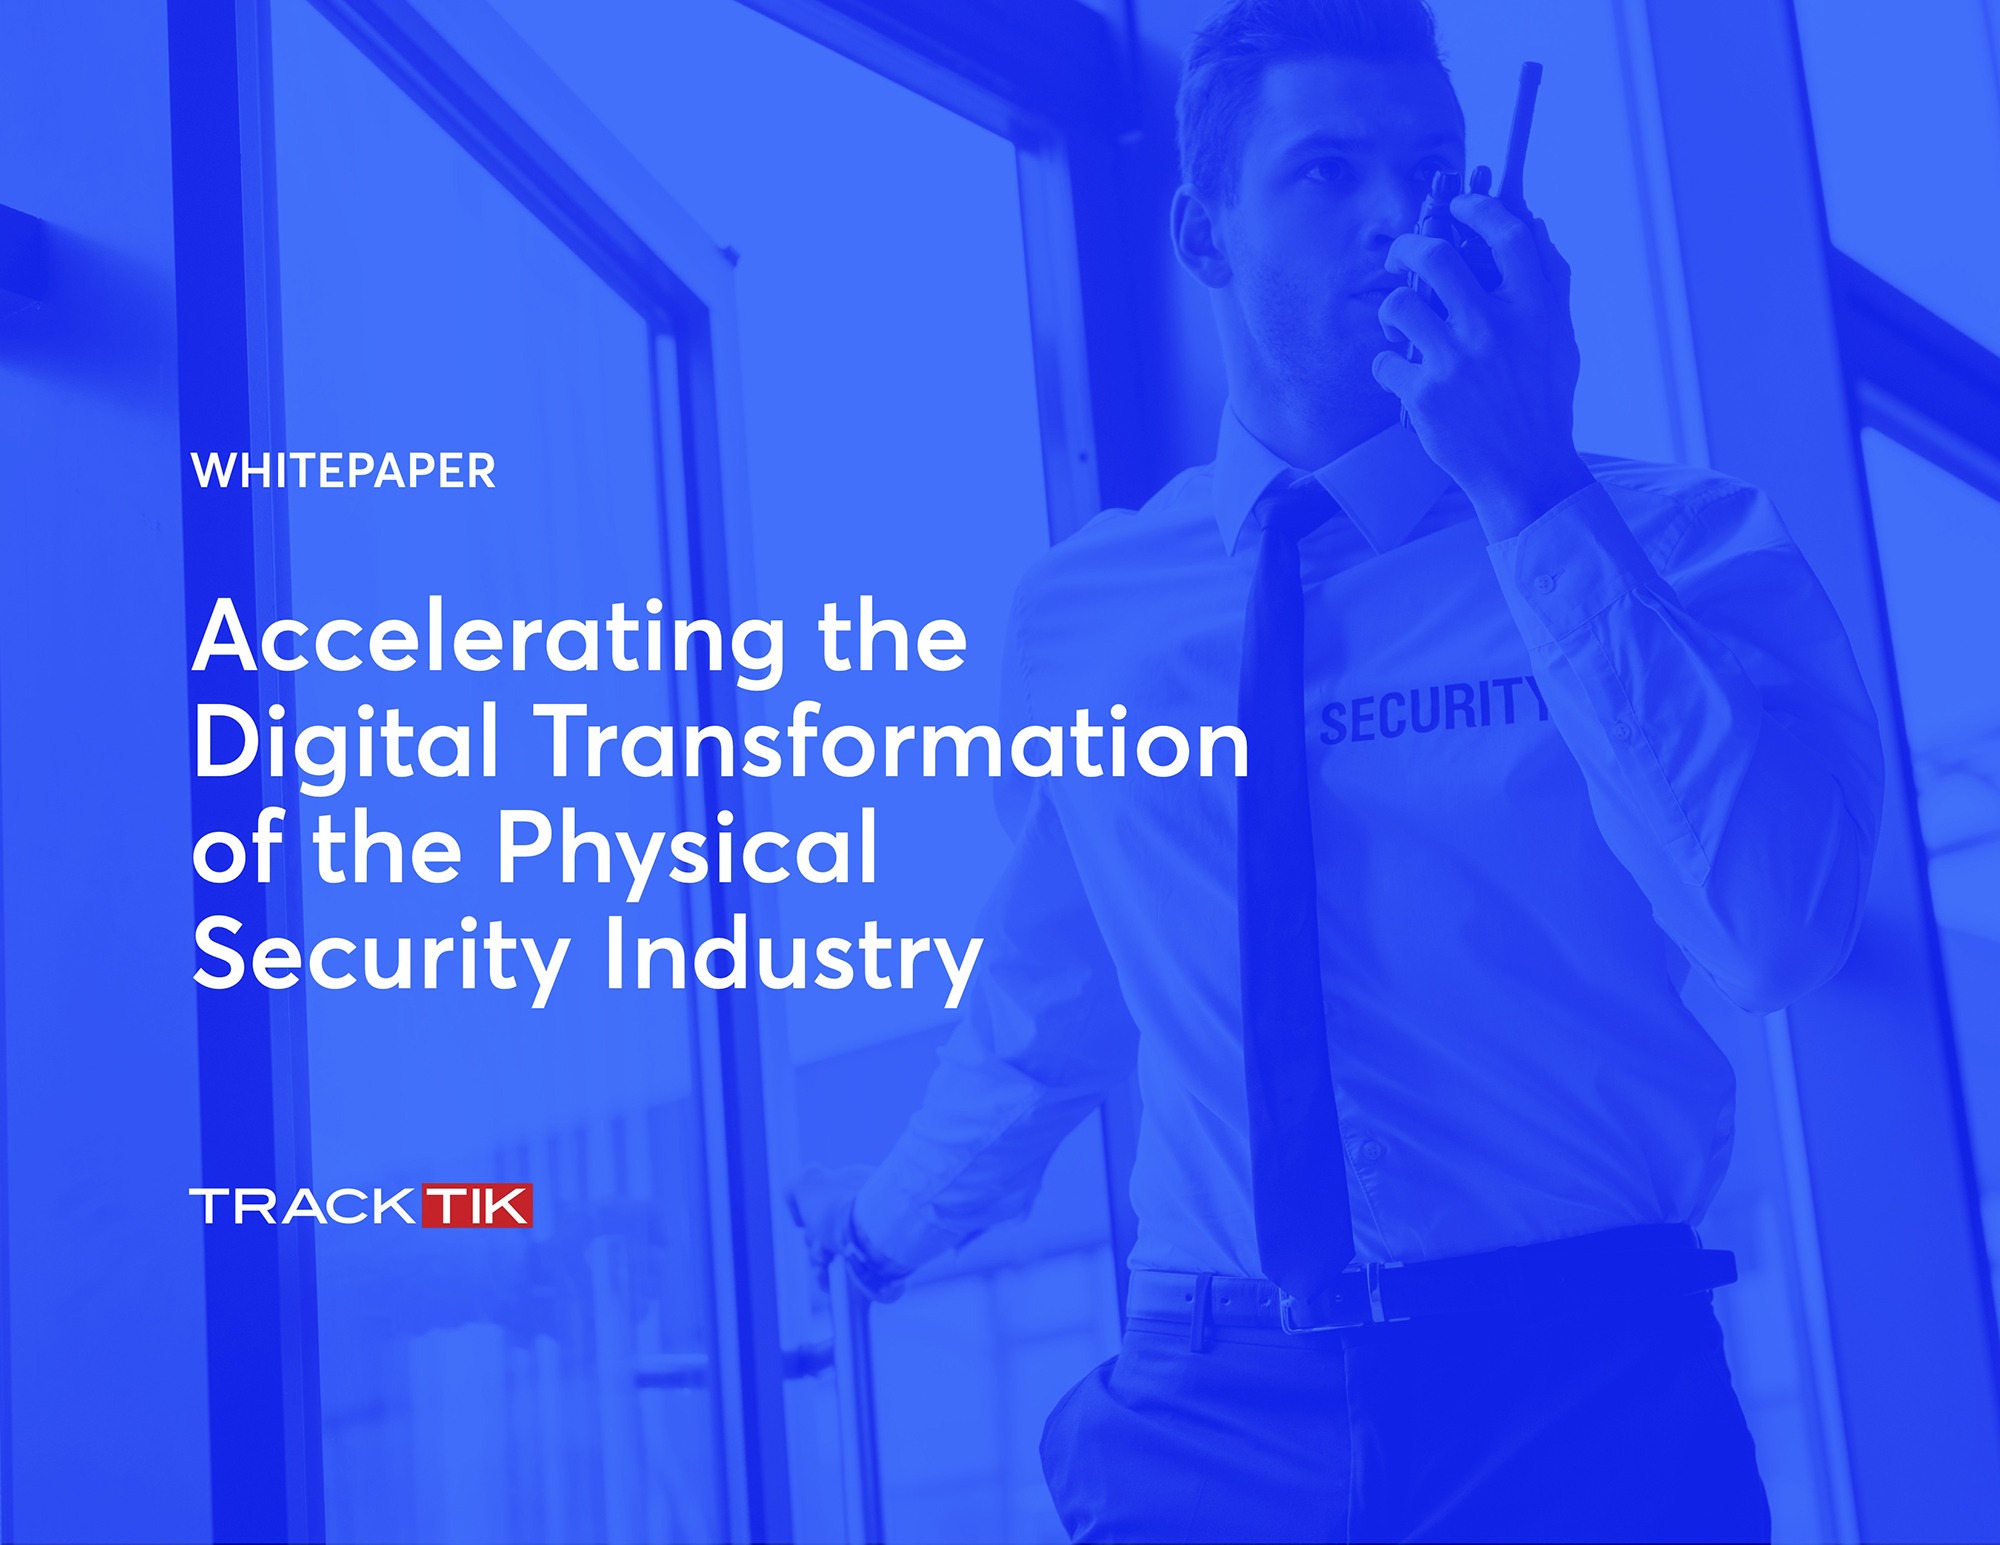 Accelerating the Digital Transformation of the Physical Security Industry